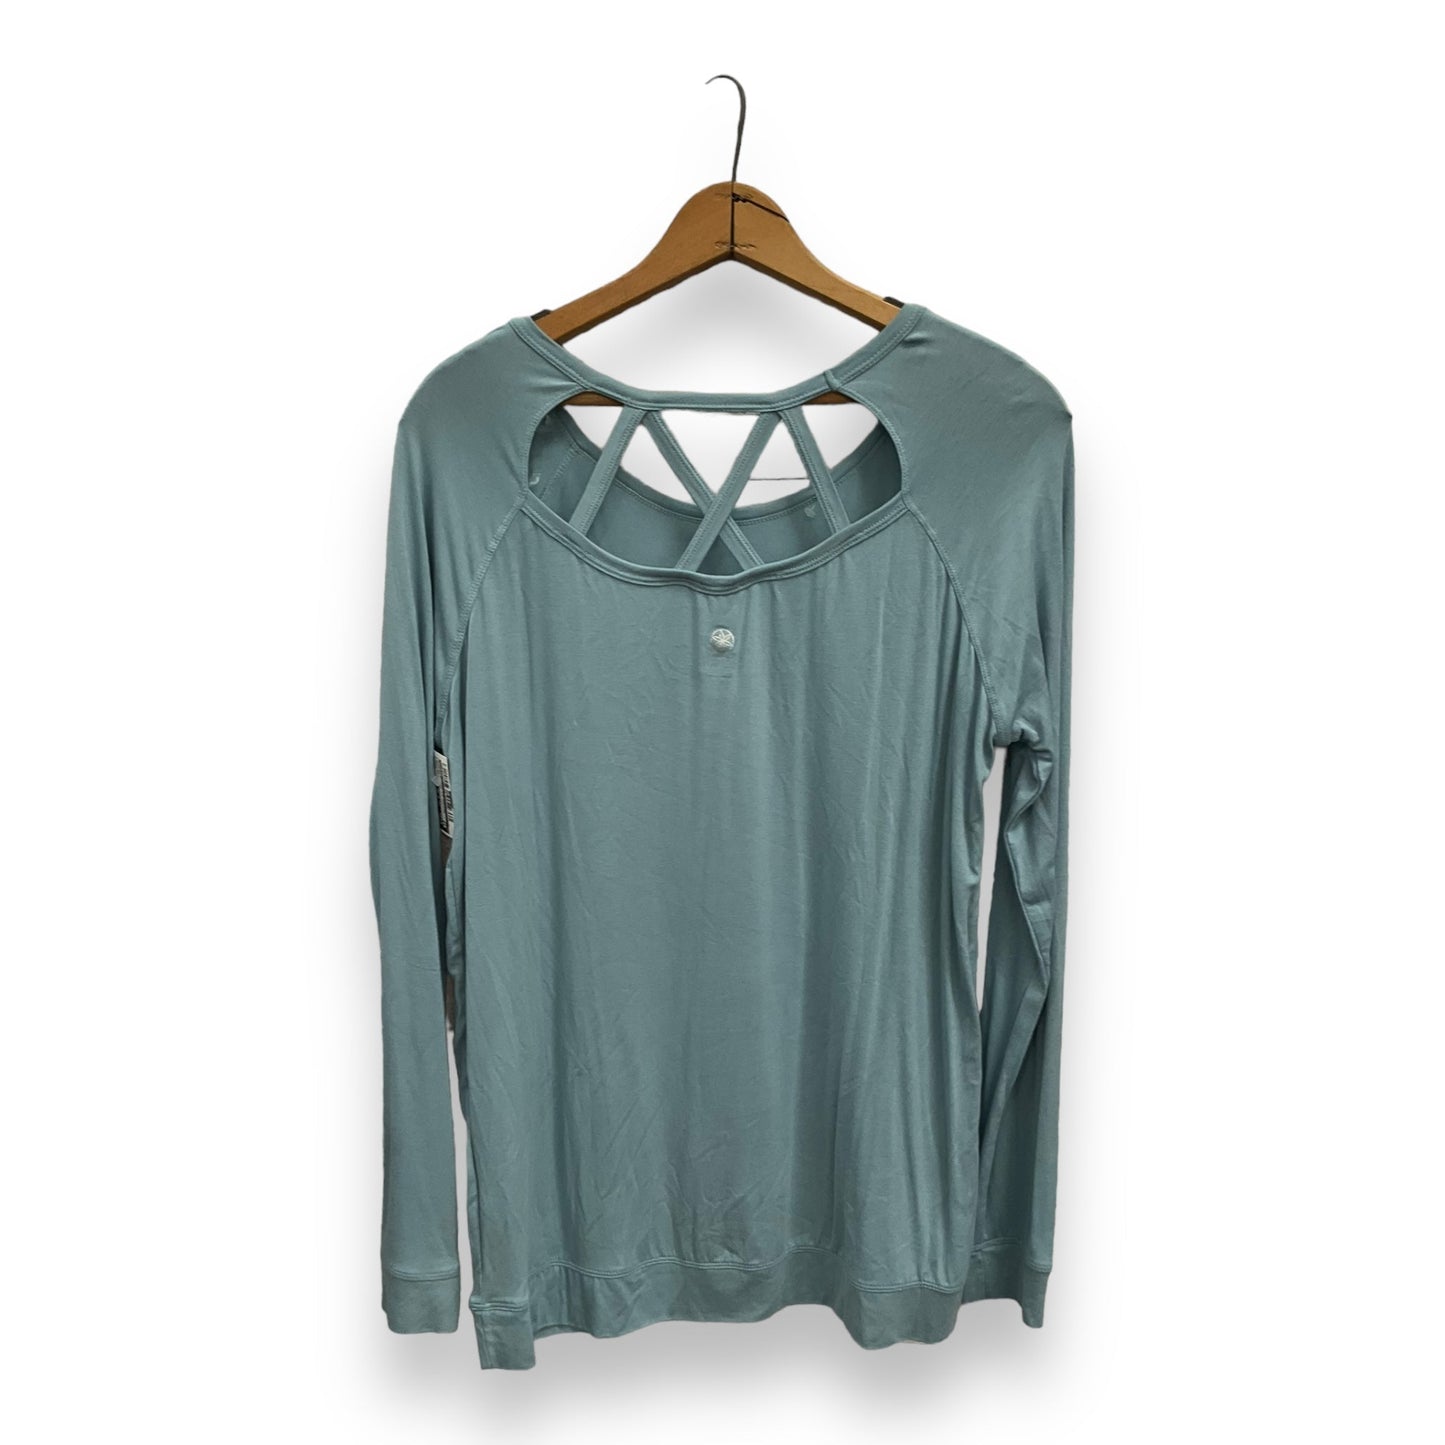 Athletic Top Long Sleeve Collar By Gaiam  Size: M